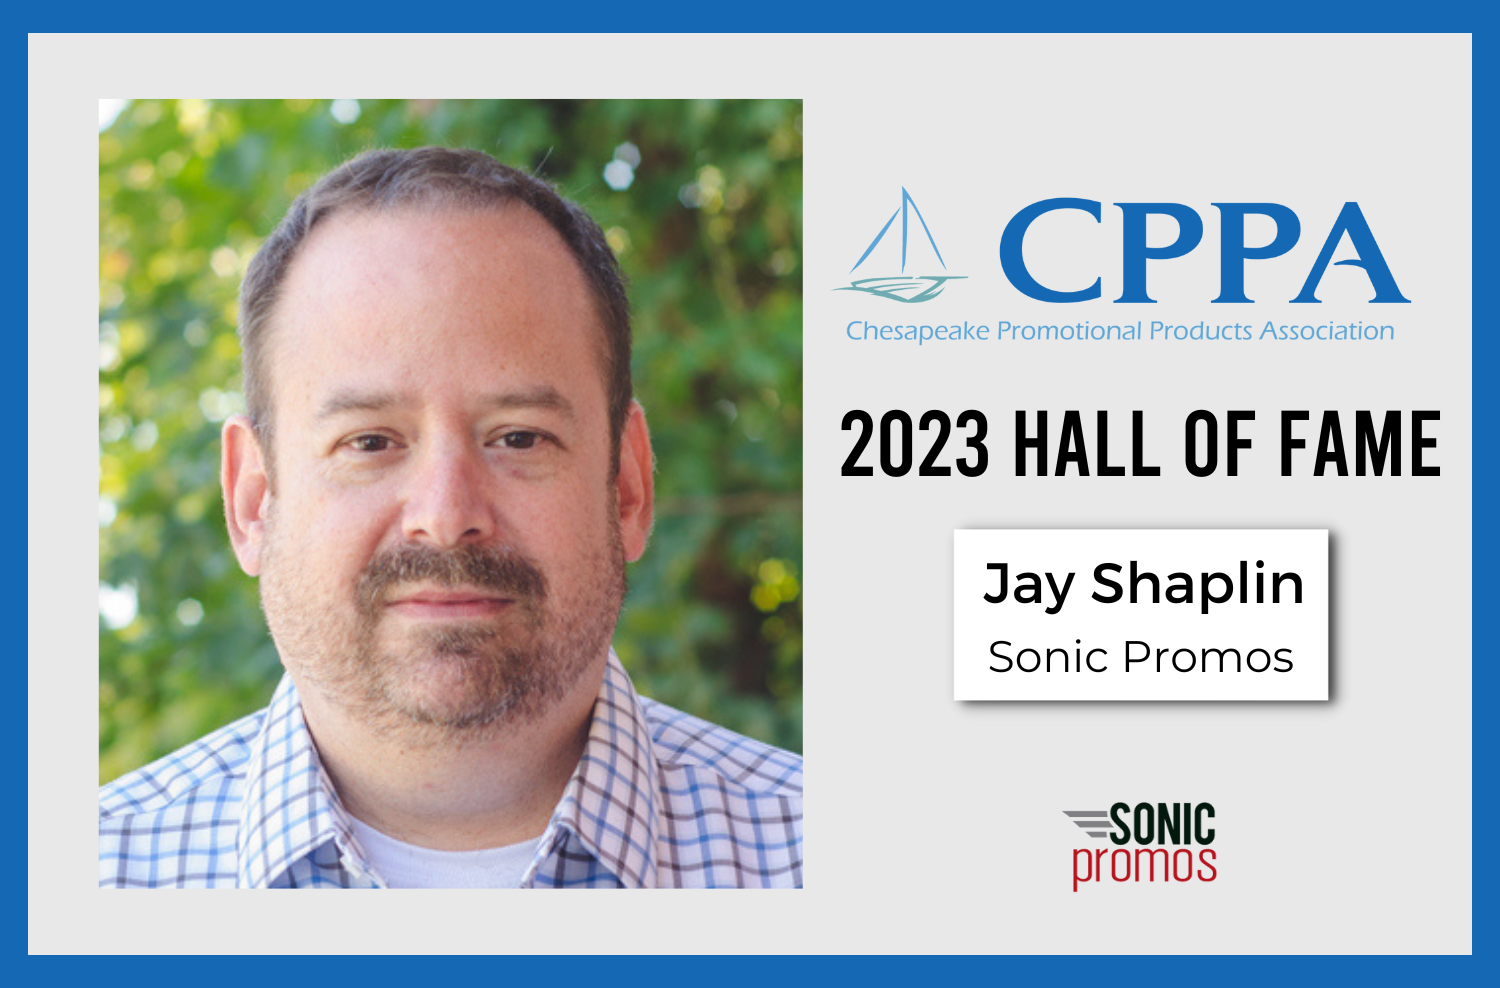 Sonic Promos’ Jay Shaplin Inducted into Hall of Fame